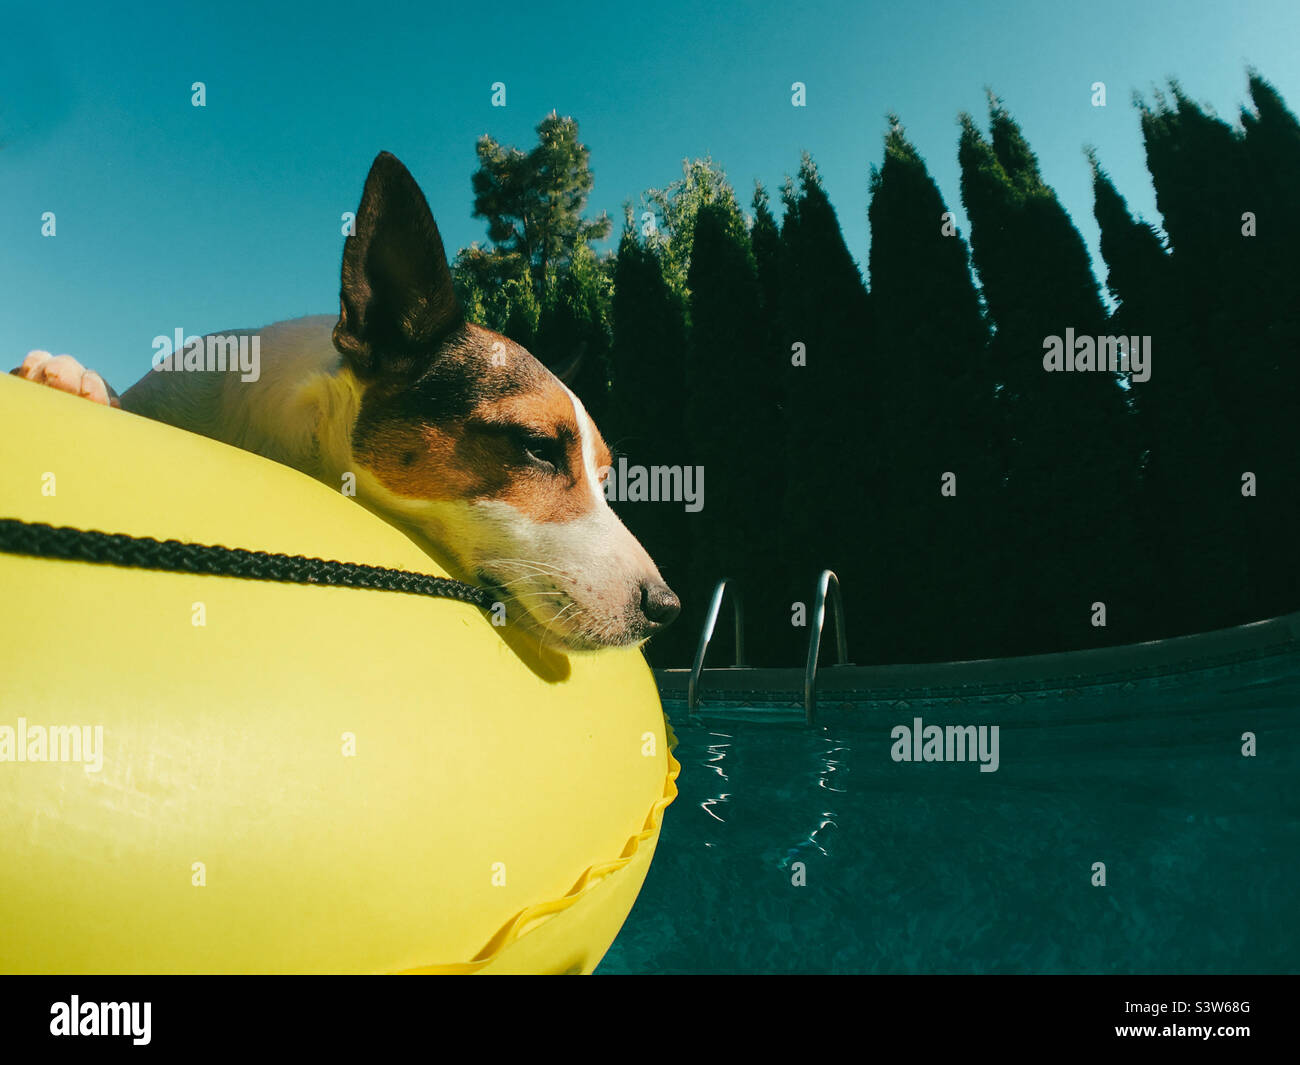 Low angle view of a Jack Russell Terrier dog lounging on a yellow inflatable float in a backyard swimming pool on a sunny summer day. Stock Photo